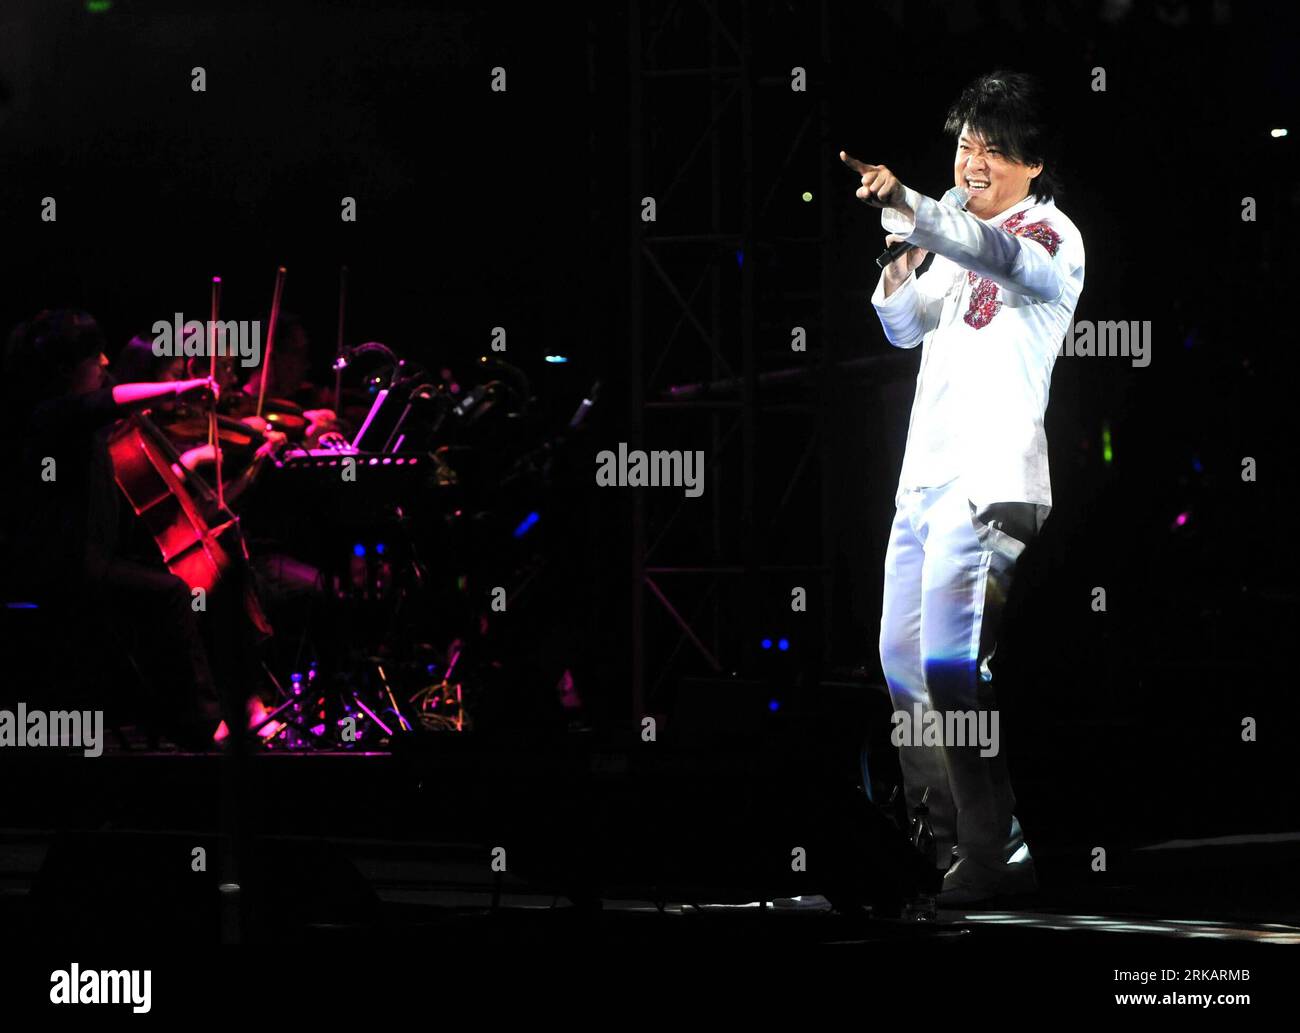 Bildnummer: 54420298  Datum: 11.09.2010  Copyright: imago/Xinhua (100912) -- WUHAN, Sept. 12, 2010 (Xinhua) -- Singer Emil Chau performs during the Wuhan stage of his 2010 tour concert in the gymnasium of the sports center in Wuhan, capital of central China s Hubei Province, Sept. 11, 2010. (Xinhua/Xiong Bo) (mcg) CHINA-WUHAN-EMIL CHAU-CONCERT (CN) PUBLICATIONxNOTxINxCHN People Entertainment Kultur Musik Aktion kbdig xdp 2010 quer    Bildnummer 54420298 Date 11 09 2010 Copyright Imago XINHUA  Wuhan Sept 12 2010 XINHUA Singer Emil Chau performs during The Wuhan Stage of His 2010 Tour Concert in Stock Photo